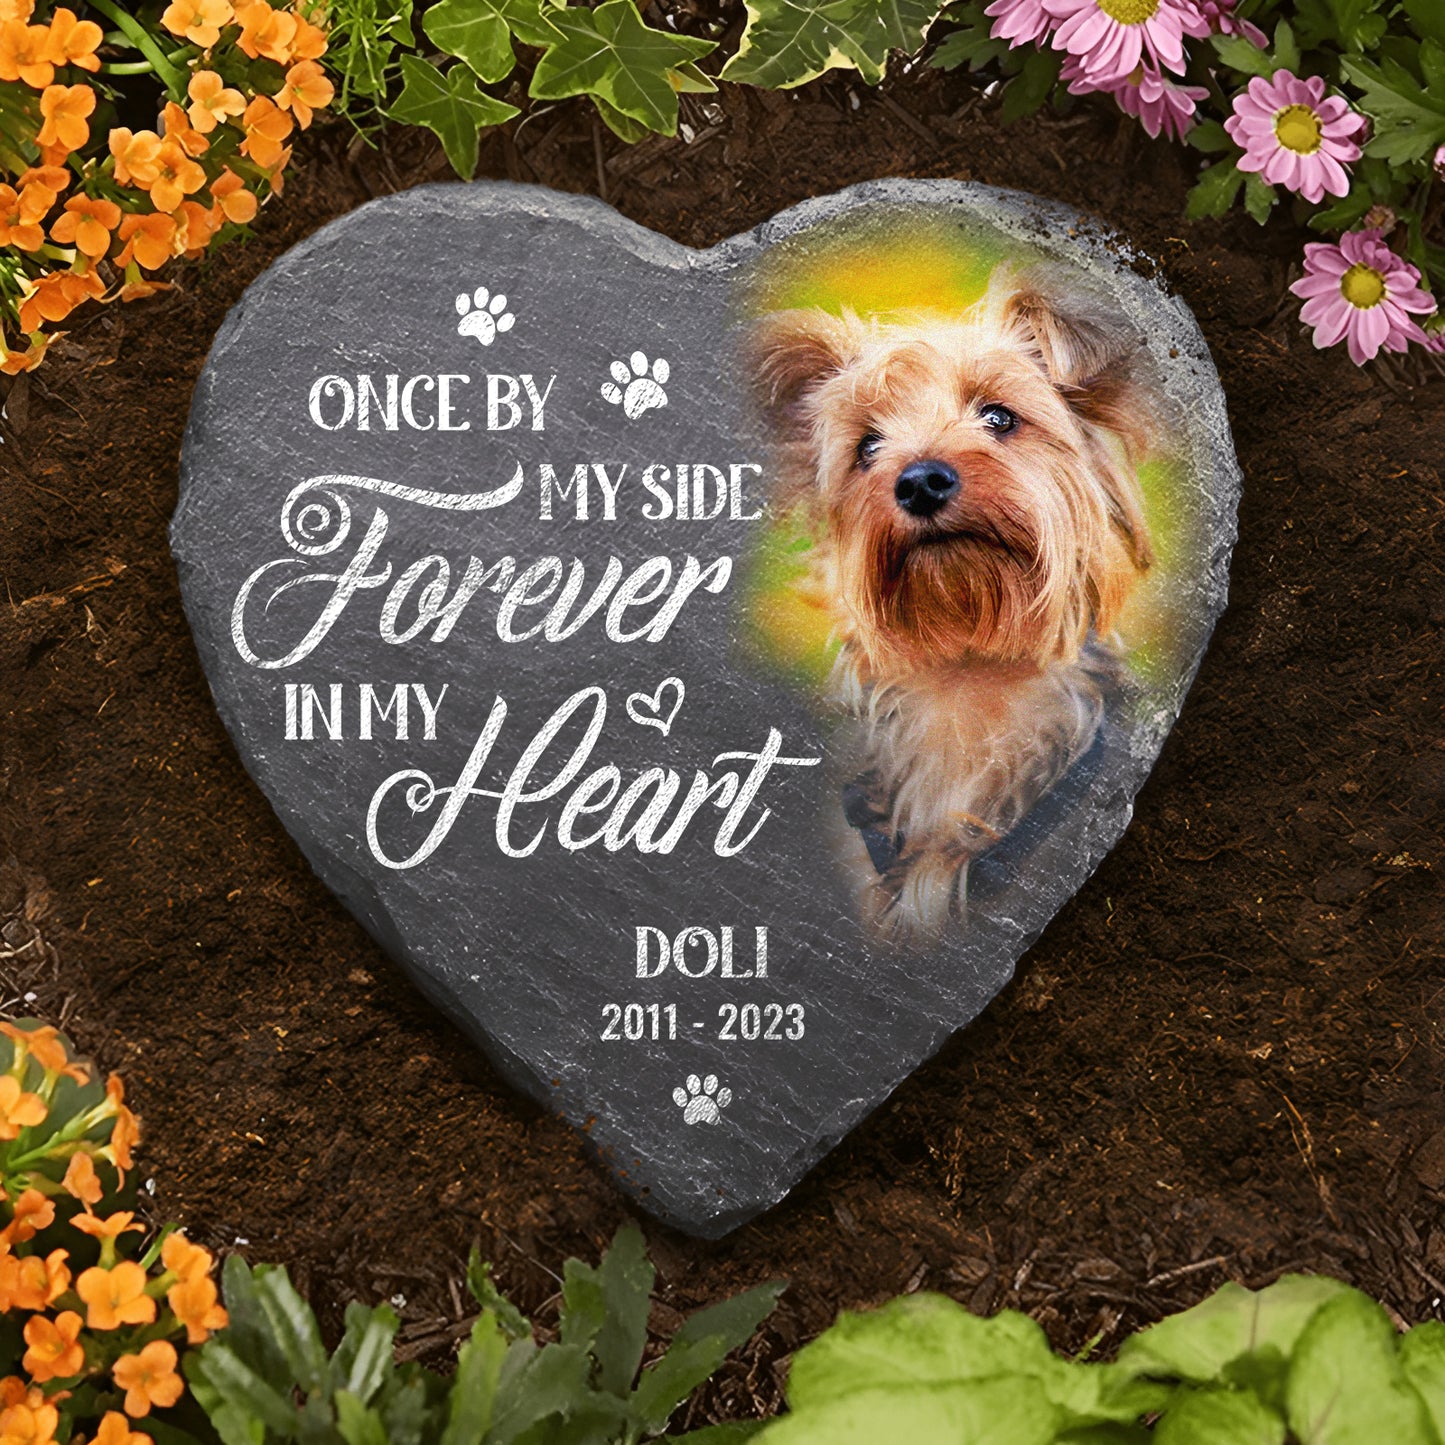 Pet Lover - Once by my side, forever in my heart - Personalized Memorial Stones